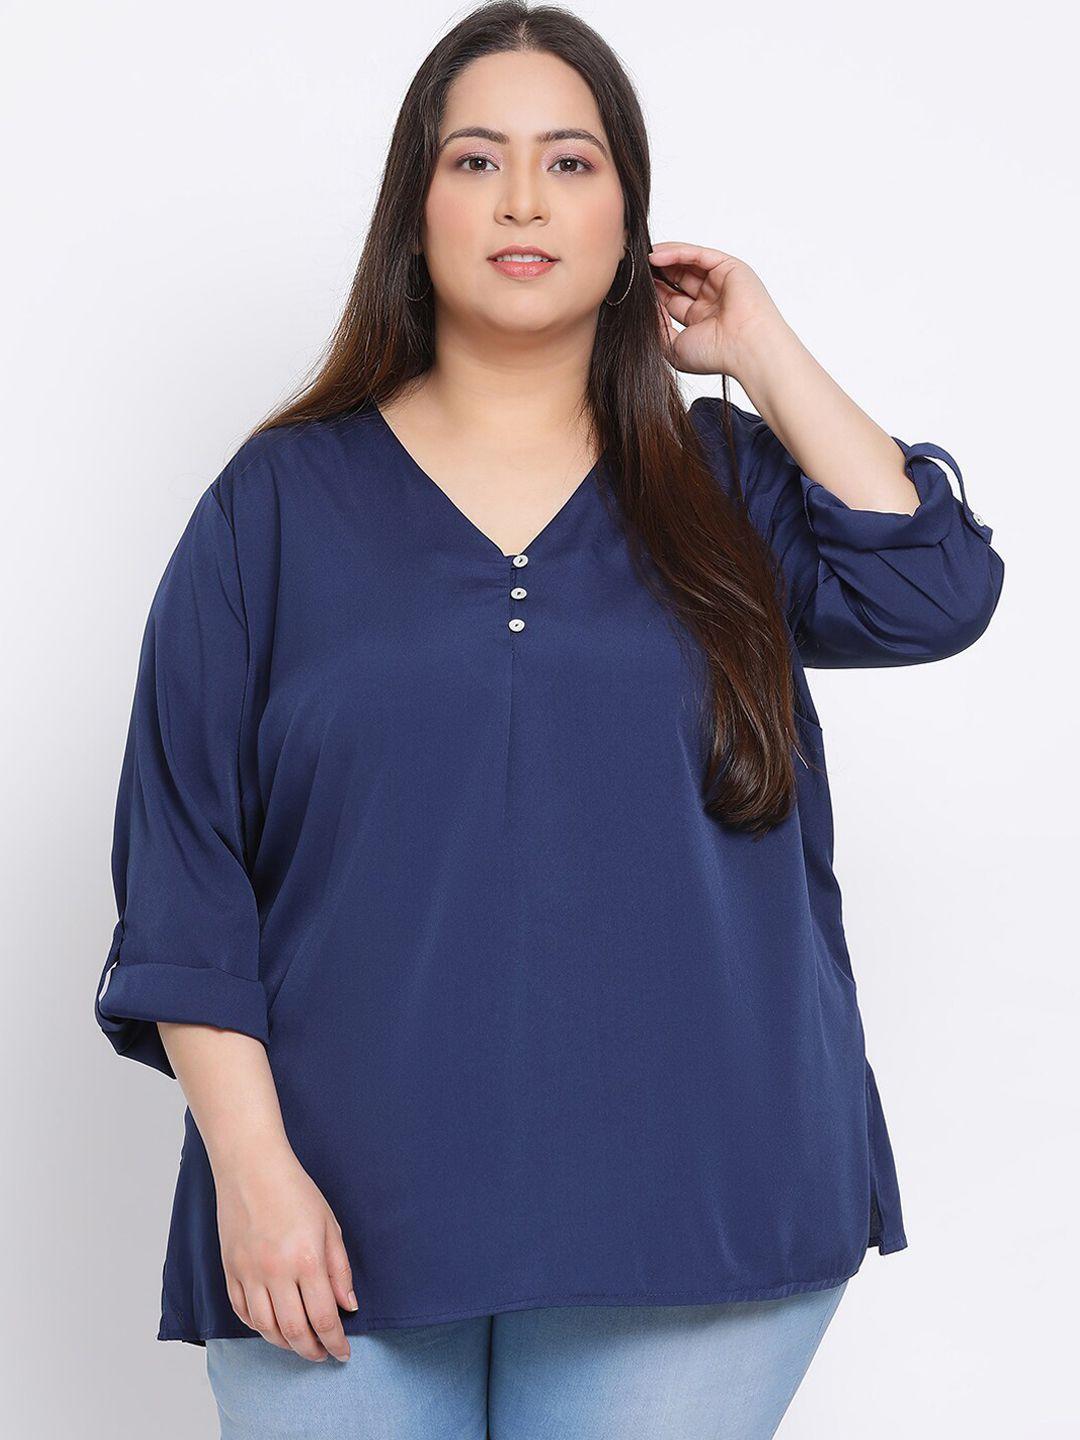 oxolloxo women navy blue solid a-line top